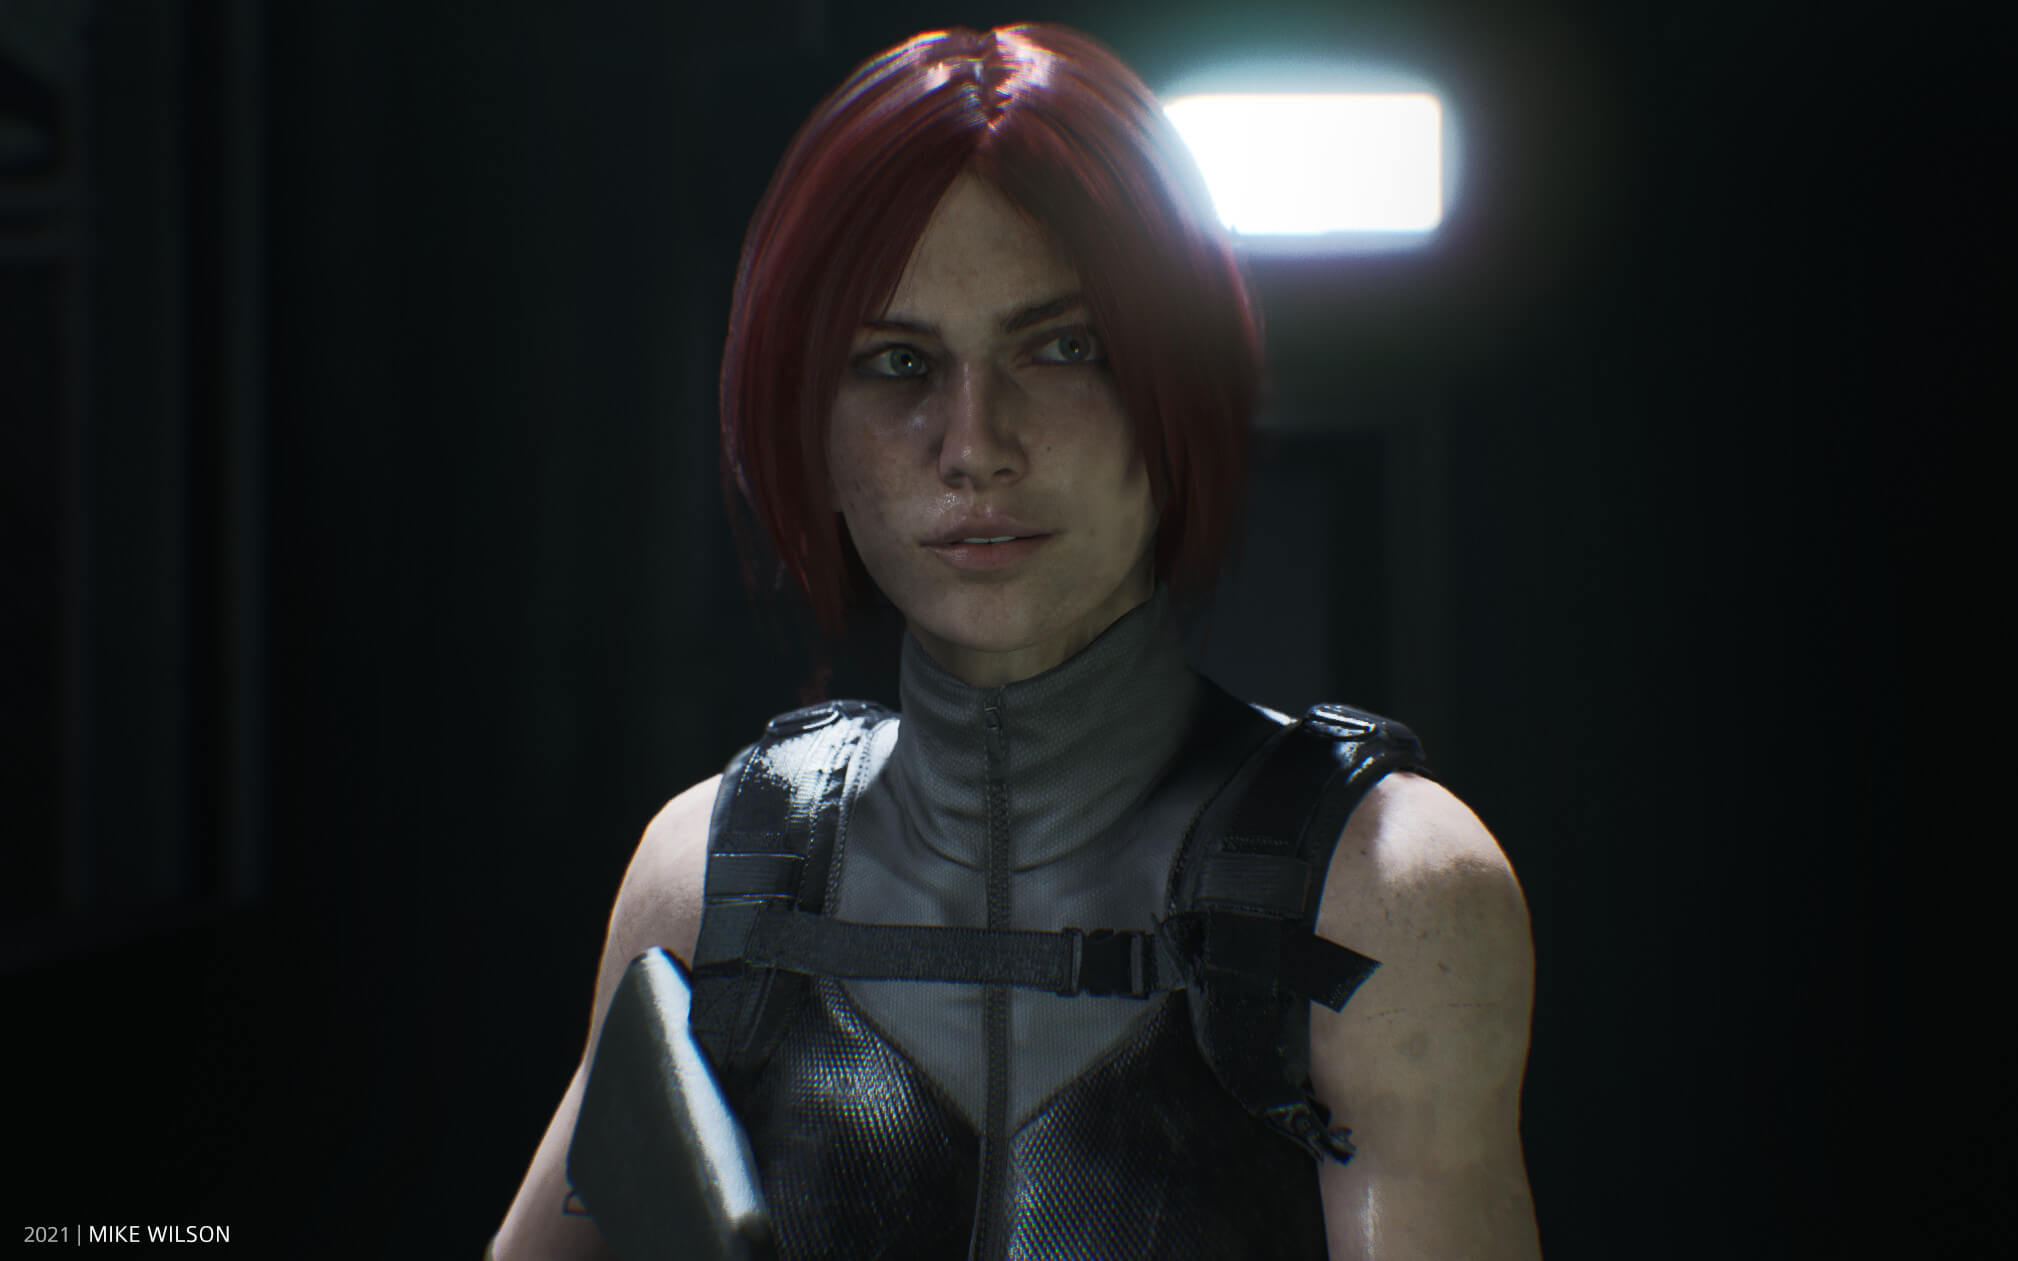 This Dino Crisis Fan Remake in Unreal Engine 5 looks mighty impressive